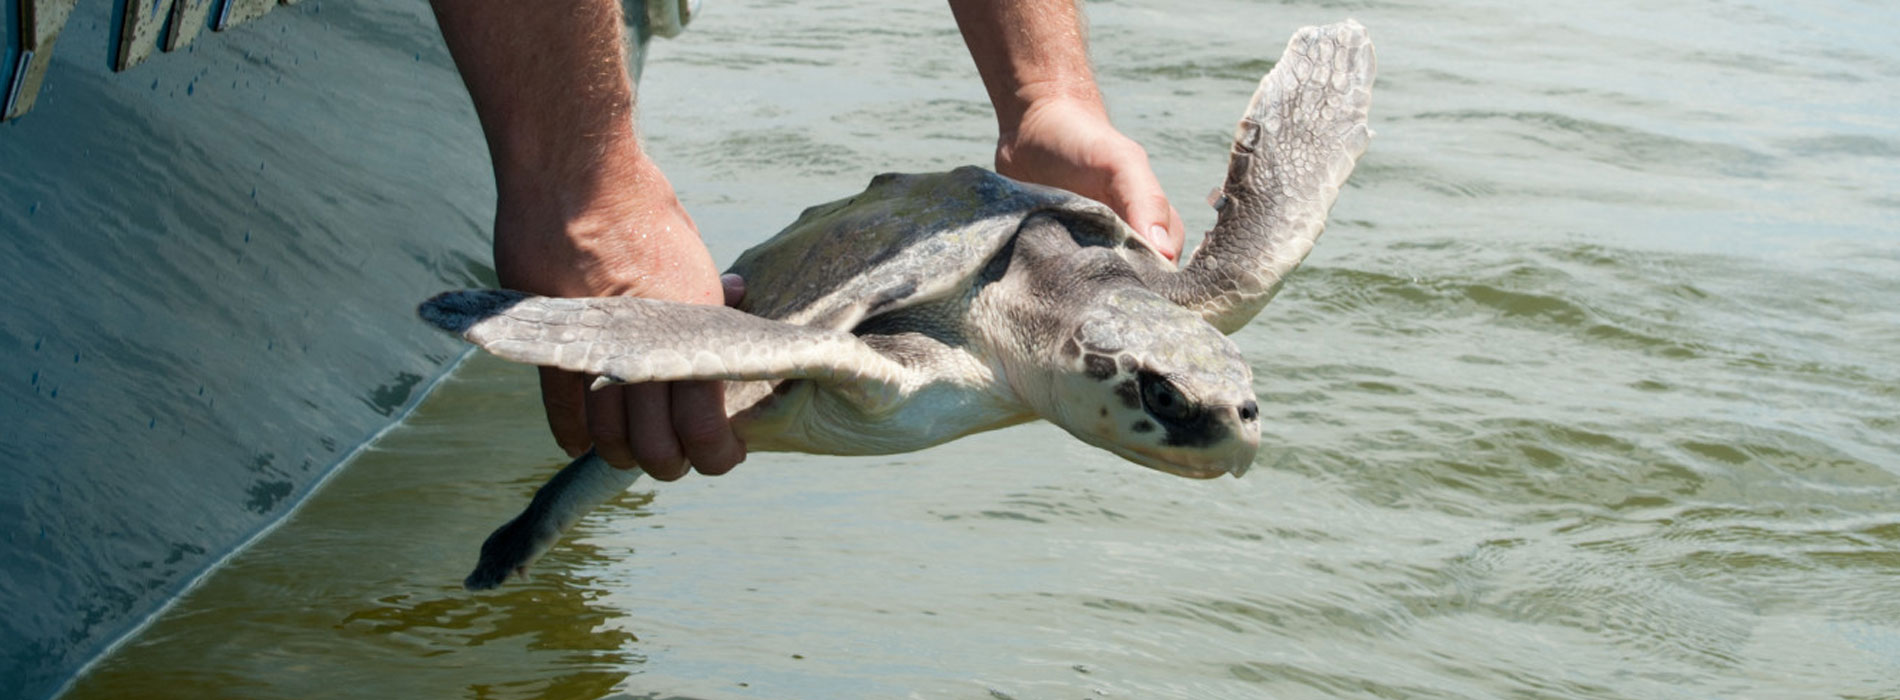 Rescued turtle gets released.